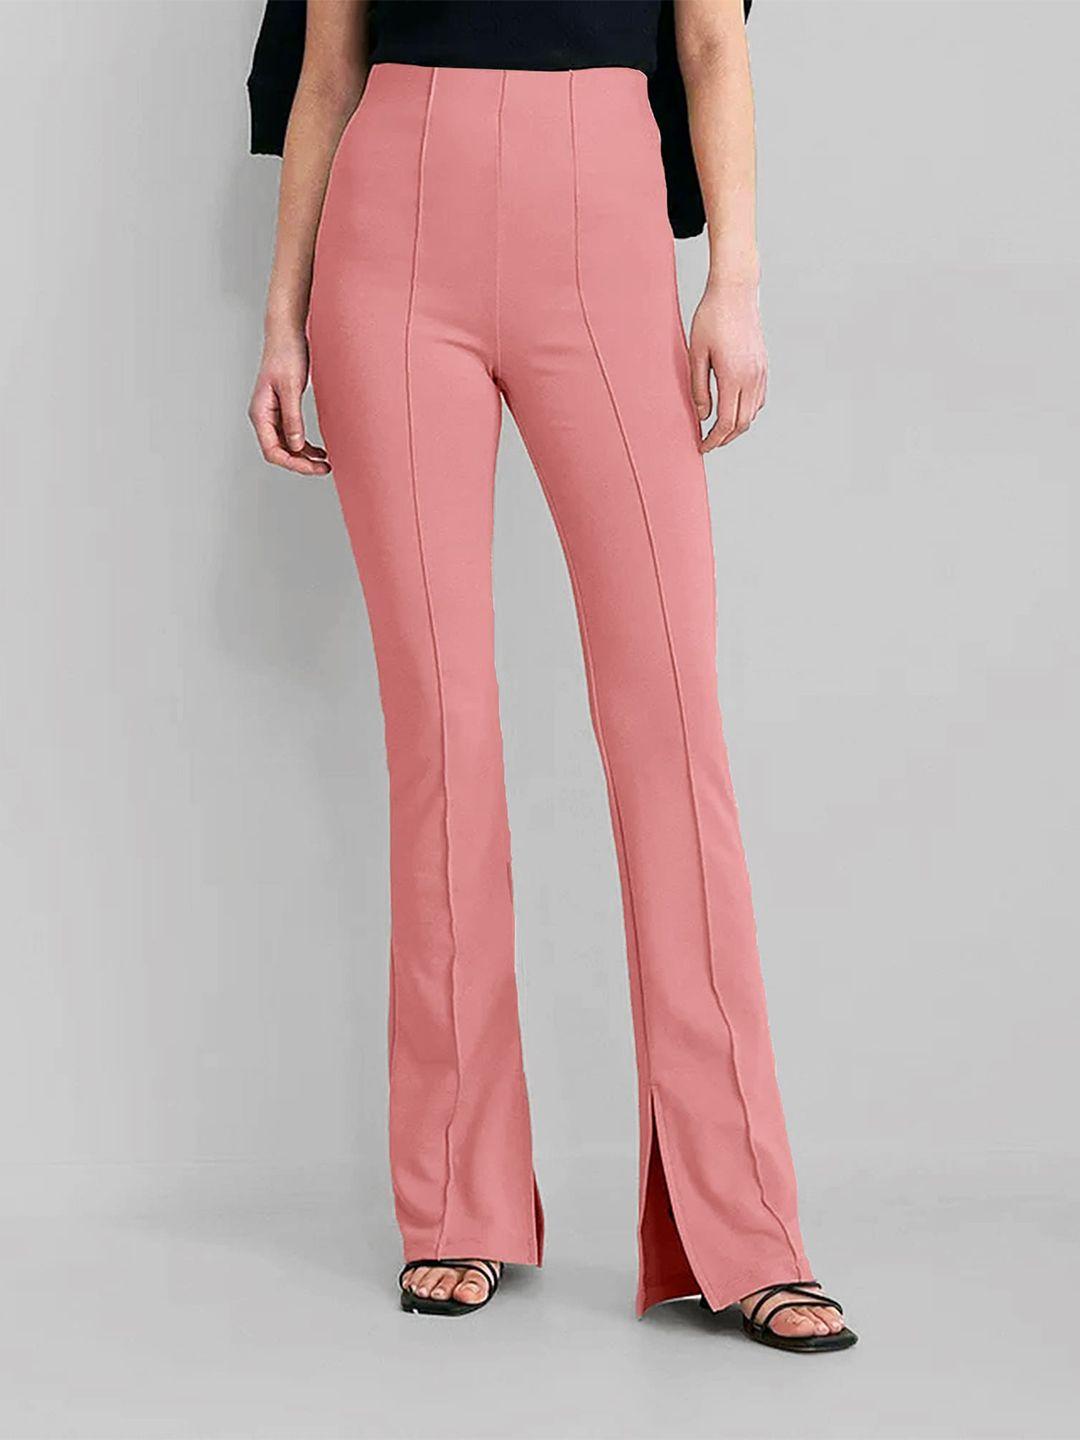 ADDYVERO Women Peach-Coloured Relaxed High-Rise Regular Fit Trousers